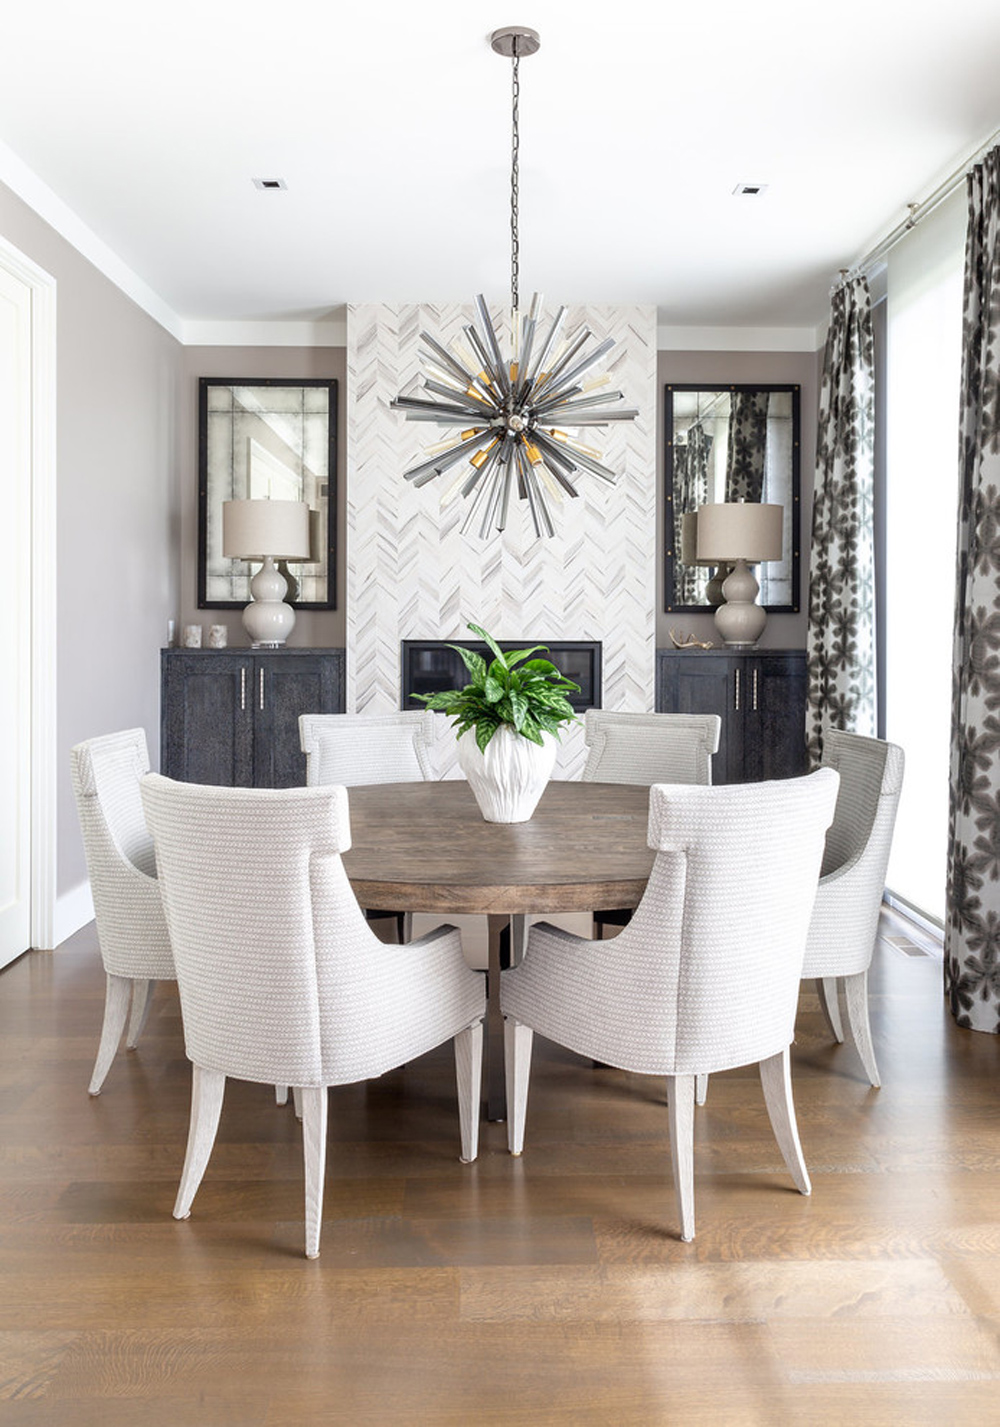 Dining Room Wall Decor Ideas That Will, Classy Dining Room Wall Decor